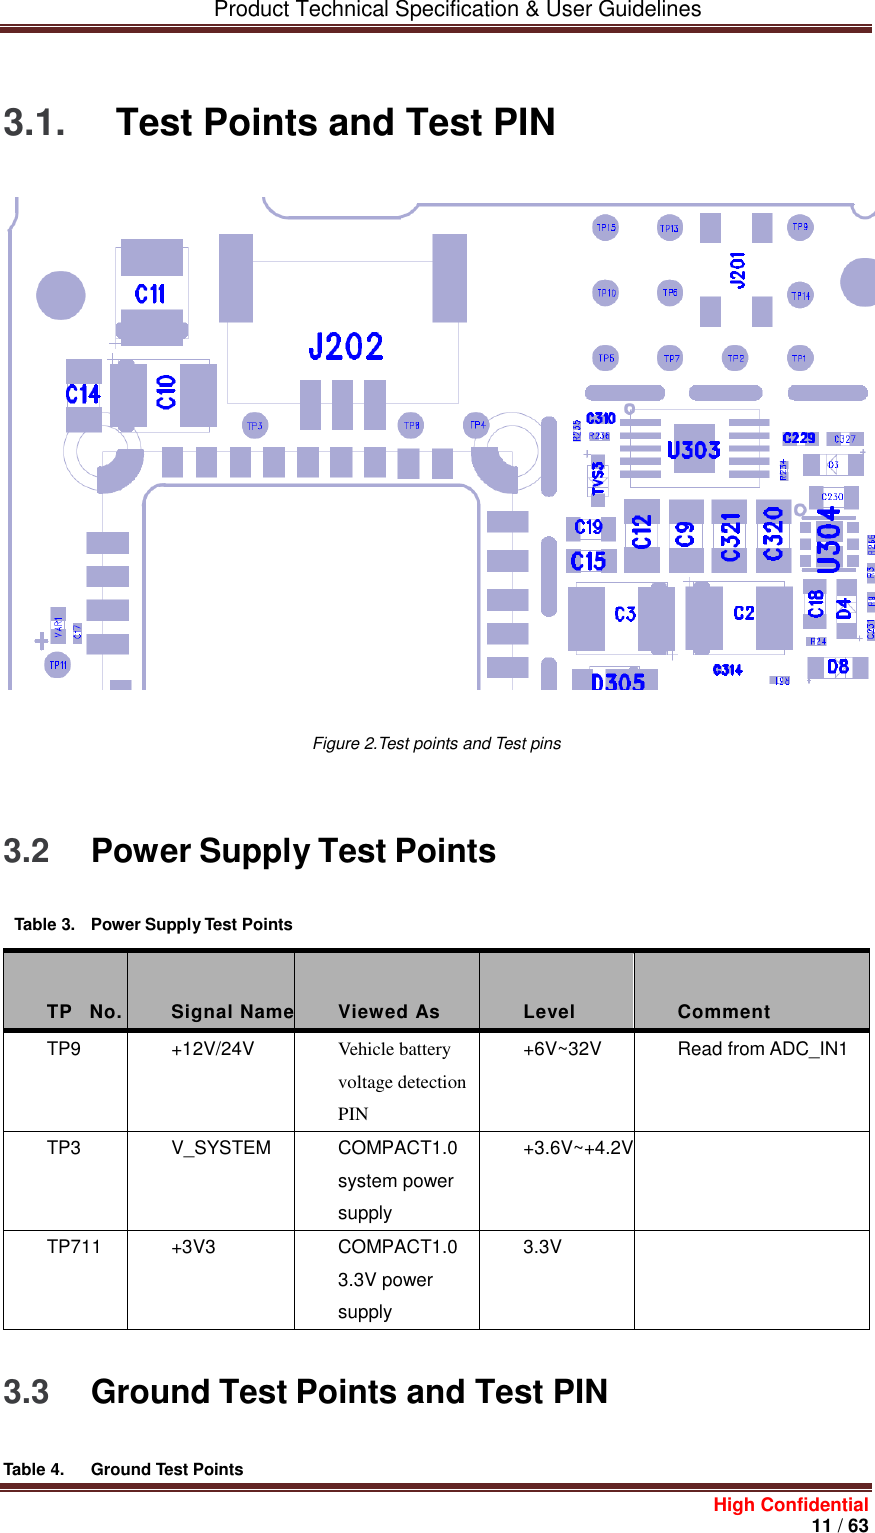         Product Technical Specification &amp; User Guidelines     High Confidential       11 / 63     3.1.  Test Points and Test PIN  Figure 2.Test points and Test pins     3.2 Power Supply Test Points  Table 3.  Power Supply Test Points    TP    No.  Signal Name  Viewed As  Level  Comment TP9 +12V/24V Vehicle battery voltage detection PIN +6V~32V Read from ADC_IN1 TP3 V_SYSTEM COMPACT1.0 system power supply +3.6V~+4.2V  TP711 +3V3 COMPACT1.0 3.3V power supply 3.3V    3.3 Ground Test Points and Test PIN Table 4.  Ground Test Points 